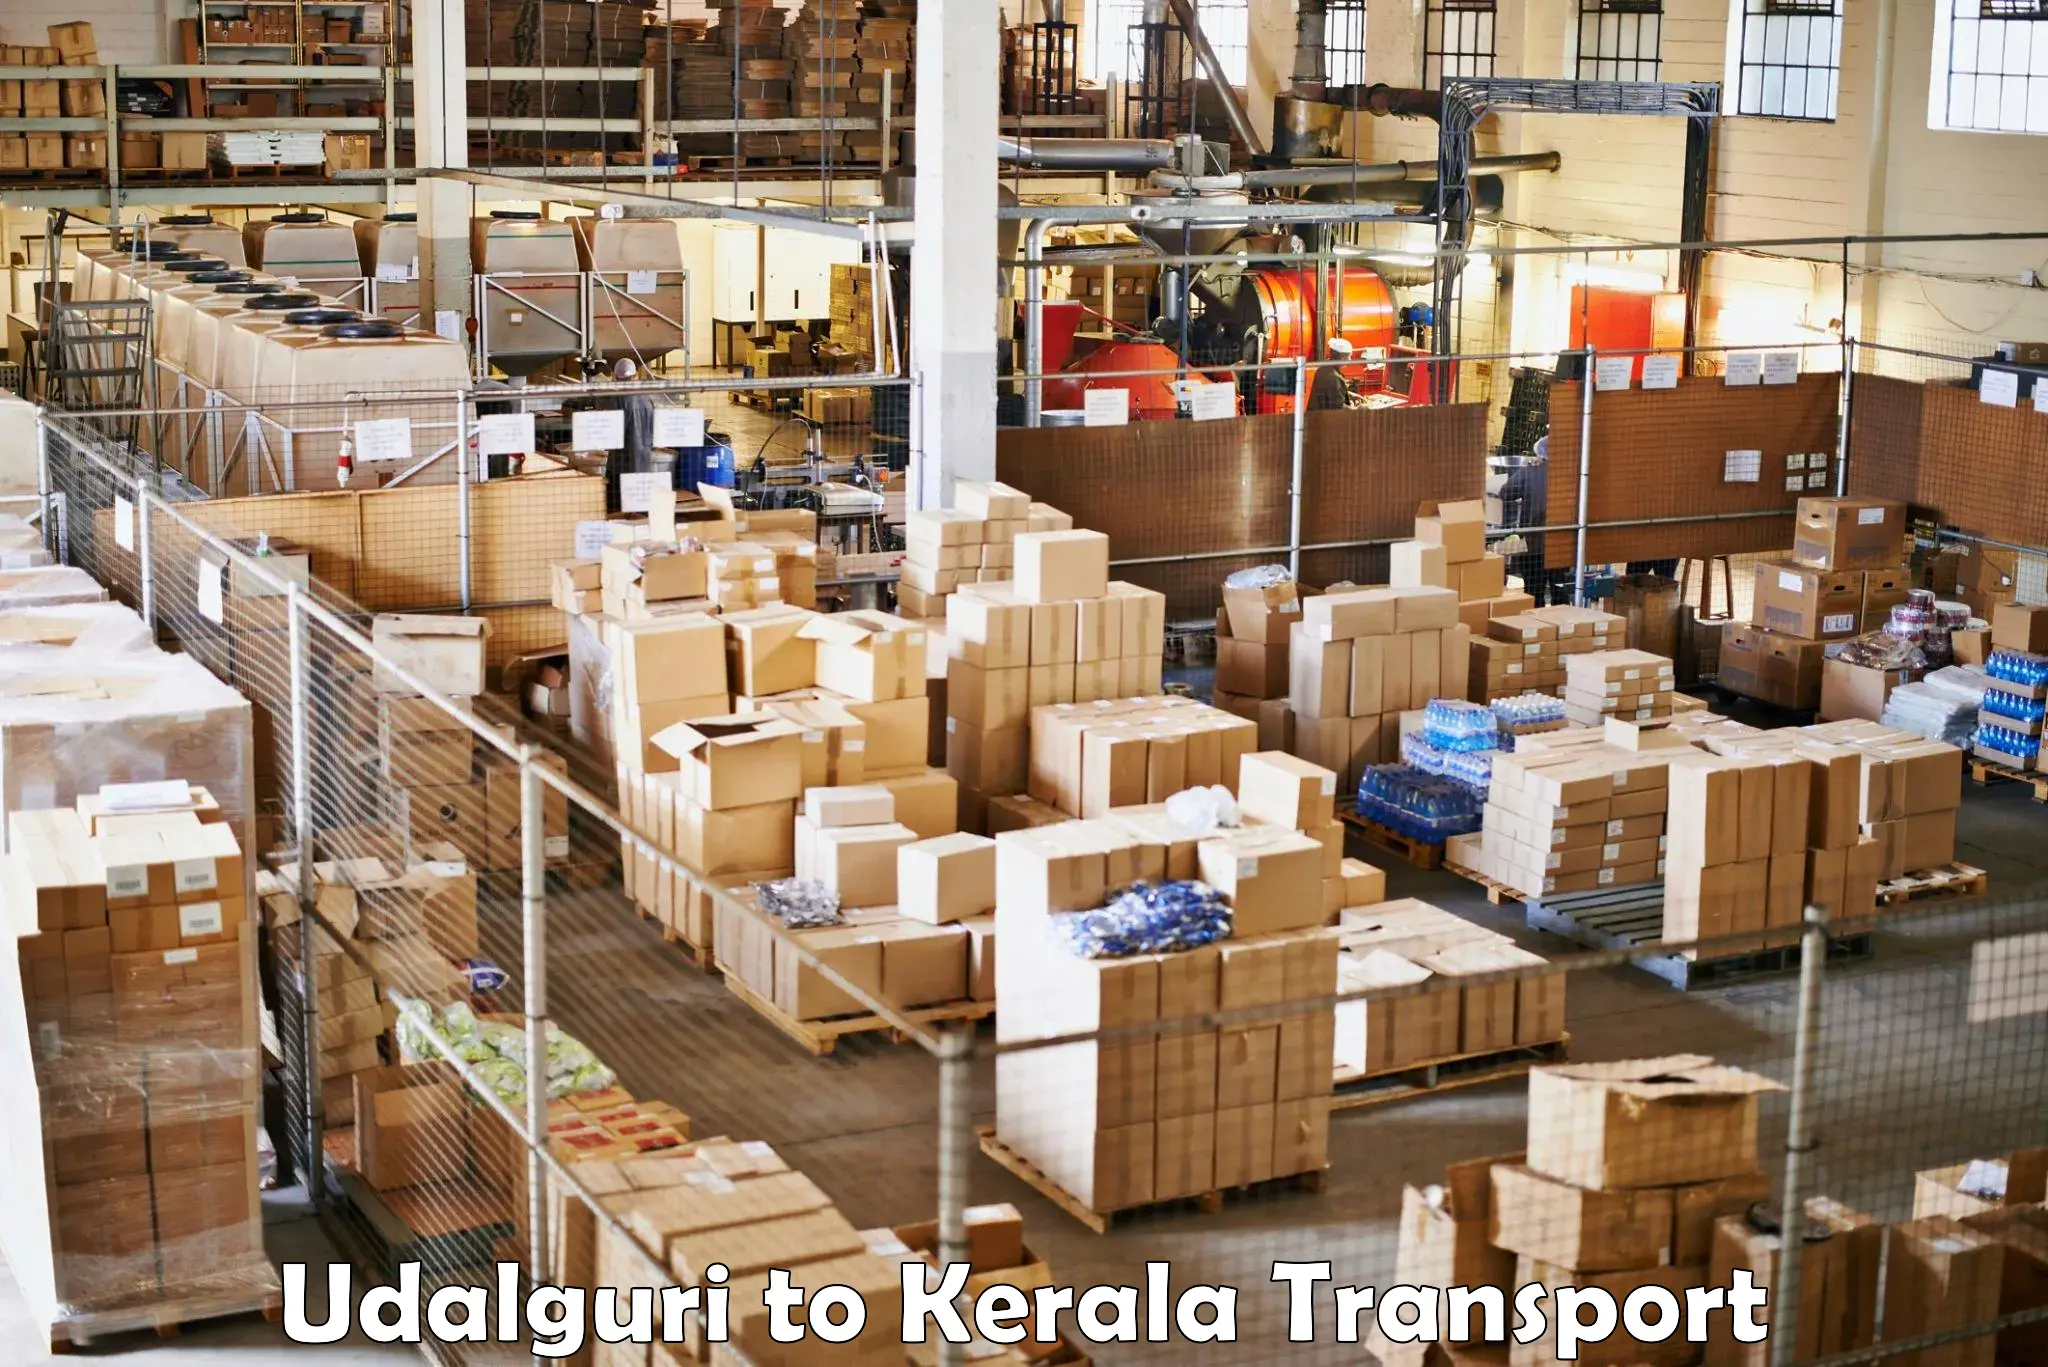 Daily parcel service transport in Udalguri to Kottayam